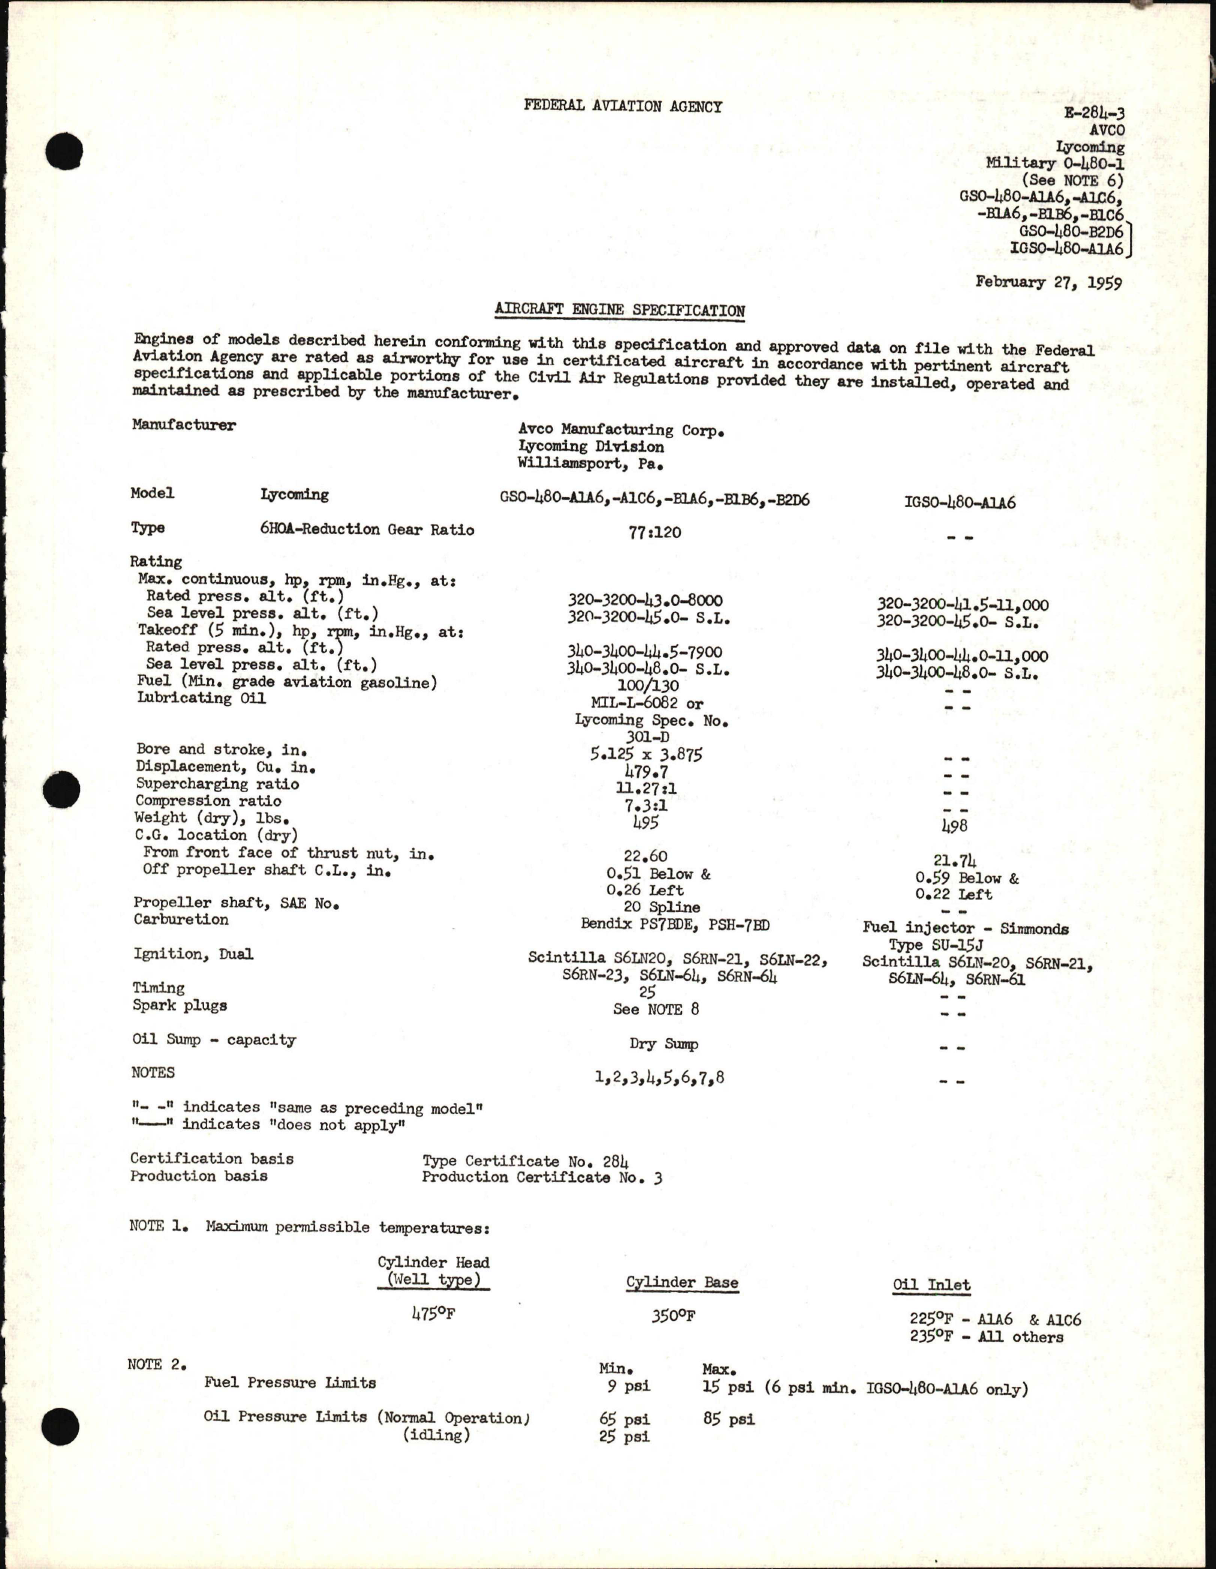 Sample page 1 from AirCorps Library document: O-480, GSO-480 and IGSO-480-A1A6